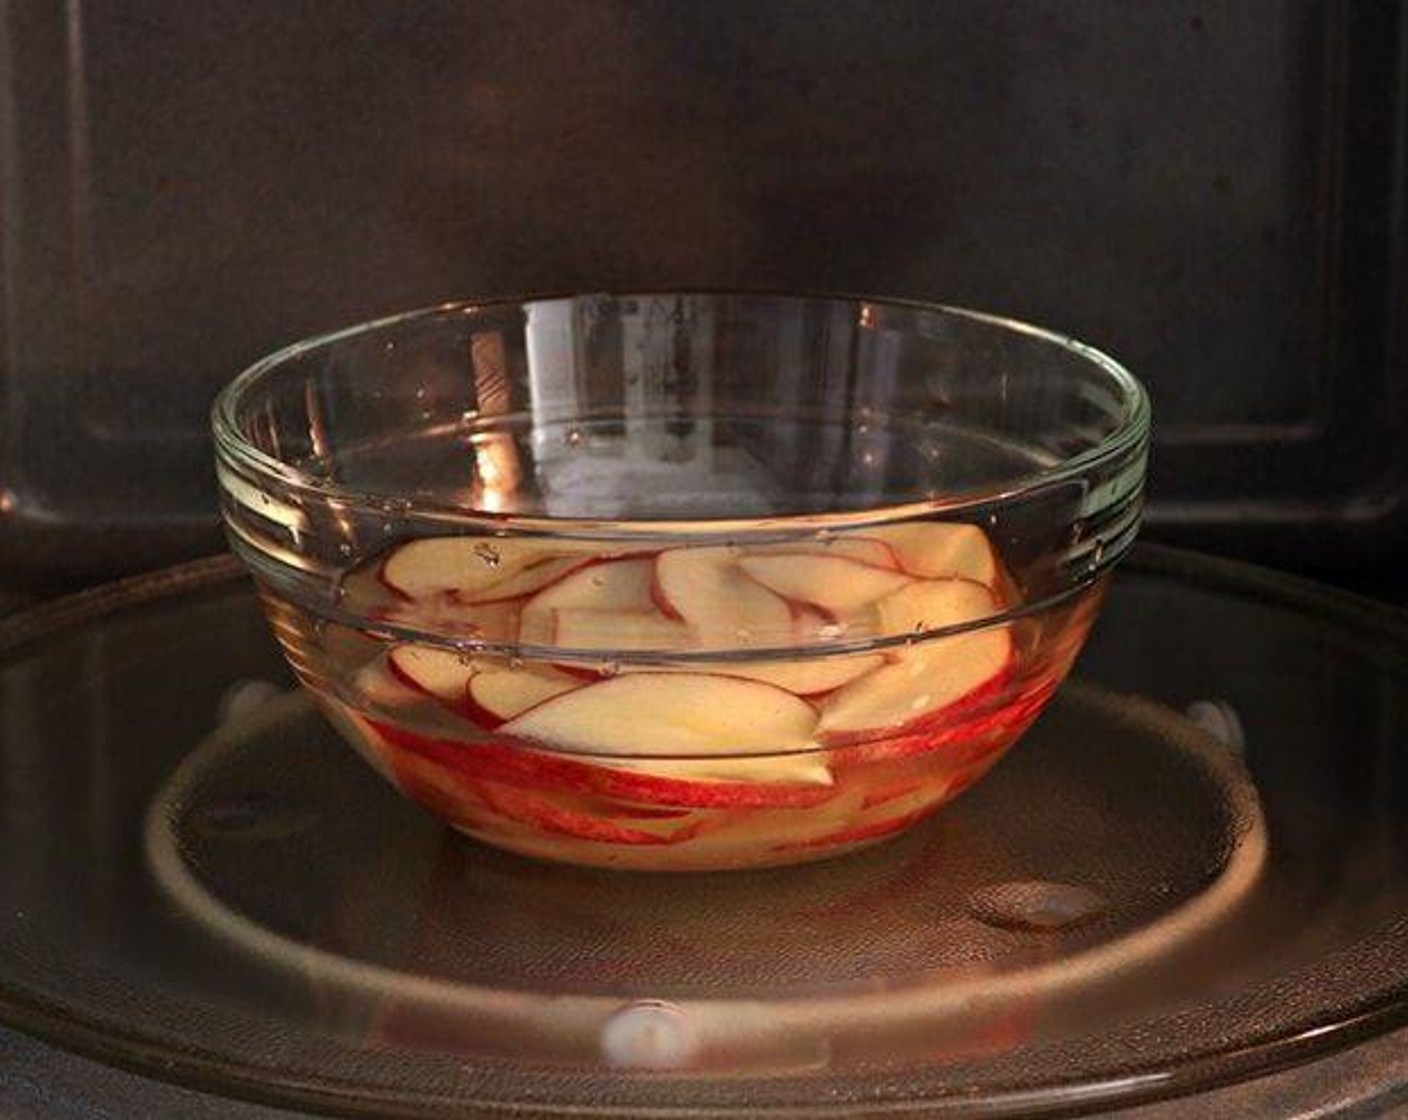 step 3 Place the sliced apples into the bowl of lemon water. Microwave, about 1-2 minutes until the apples are pliable, soft but not mushy. Reserve 1 tablespoon apple liquid to grated apple.